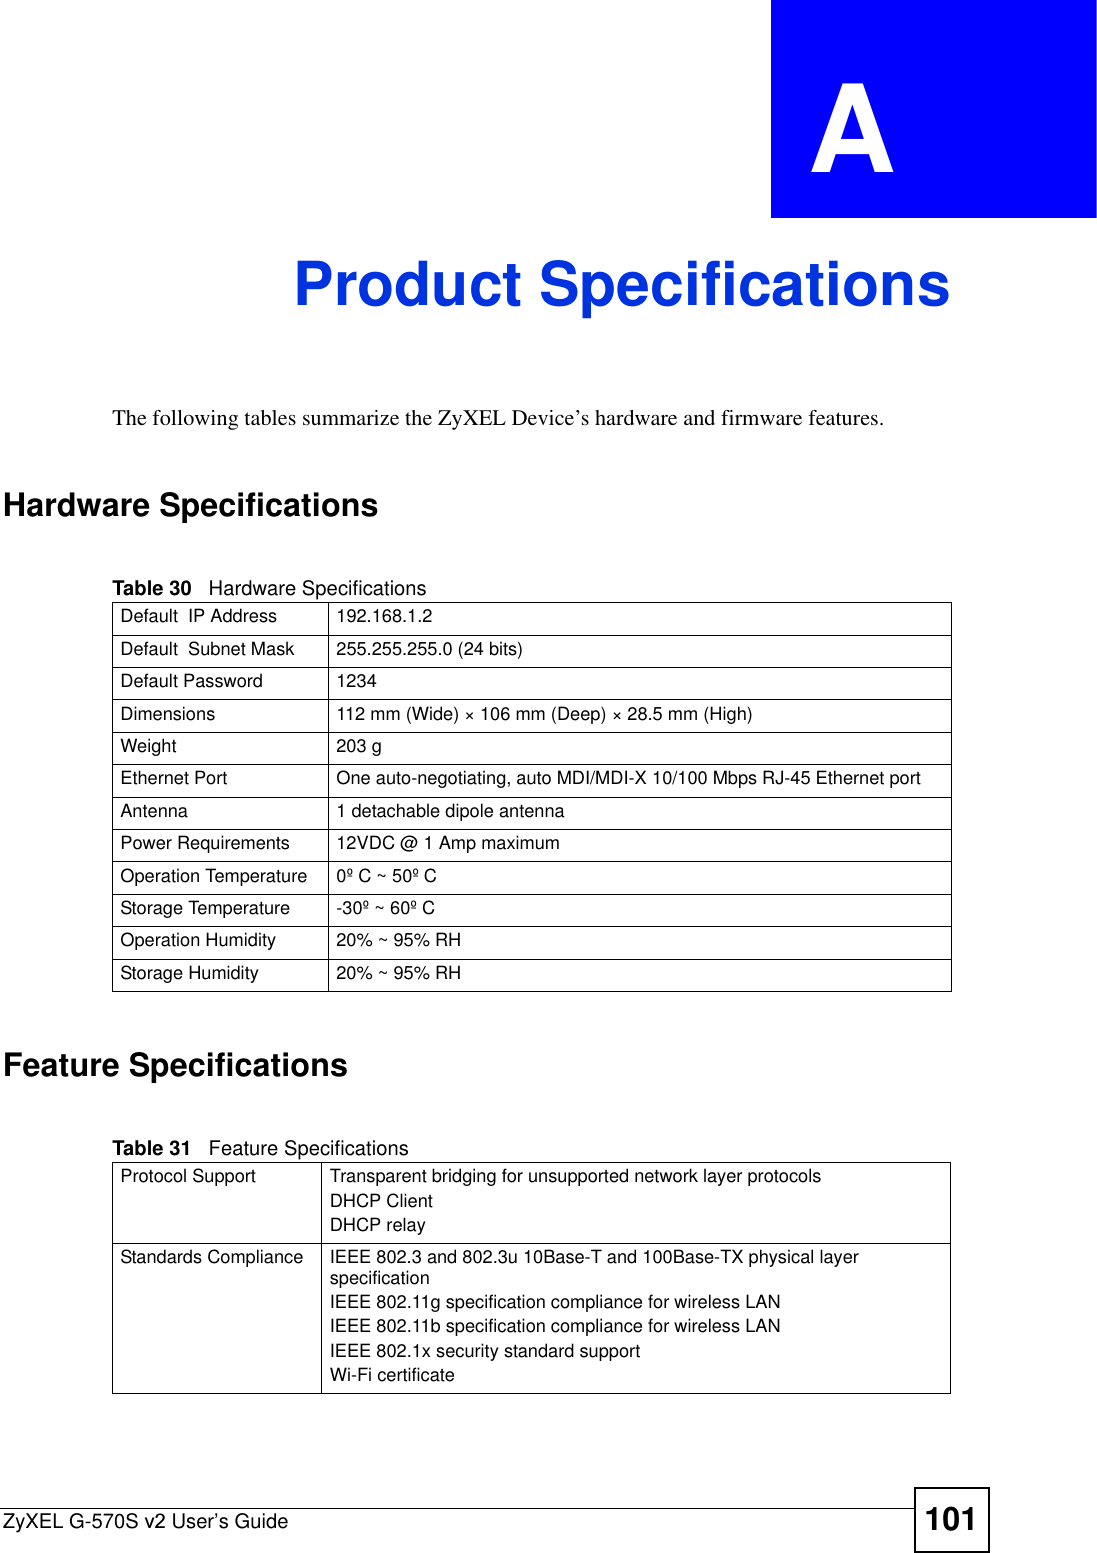 ZyXEL G-570S v2 User’s Guide 101APPENDIX  A Product SpecificationsThe following tables summarize the ZyXEL Device’s hardware and firmware features.Hardware SpecificationsFeature SpecificationsTable 30   Hardware SpecificationsDefault  IP Address 192.168.1.2Default  Subnet Mask 255.255.255.0 (24 bits)Default Password 1234Dimensions 112 mm (Wide) × 106 mm (Deep) × 28.5 mm (High)Weight 203 gEthernet Port One auto-negotiating, auto MDI/MDI-X 10/100 Mbps RJ-45 Ethernet portAntenna 1 detachable dipole antennaPower Requirements 12VDC @ 1 Amp maximumOperation Temperature 0º C ~ 50º CStorage Temperature -30º ~ 60º COperation Humidity 20% ~ 95% RHStorage Humidity 20% ~ 95% RHTable 31   Feature SpecificationsProtocol Support Transparent bridging for unsupported network layer protocolsDHCP ClientDHCP relayStandards Compliance IEEE 802.3 and 802.3u 10Base-T and 100Base-TX physical layer specificationIEEE 802.11g specification compliance for wireless LANIEEE 802.11b specification compliance for wireless LANIEEE 802.1x security standard supportWi-Fi certificate